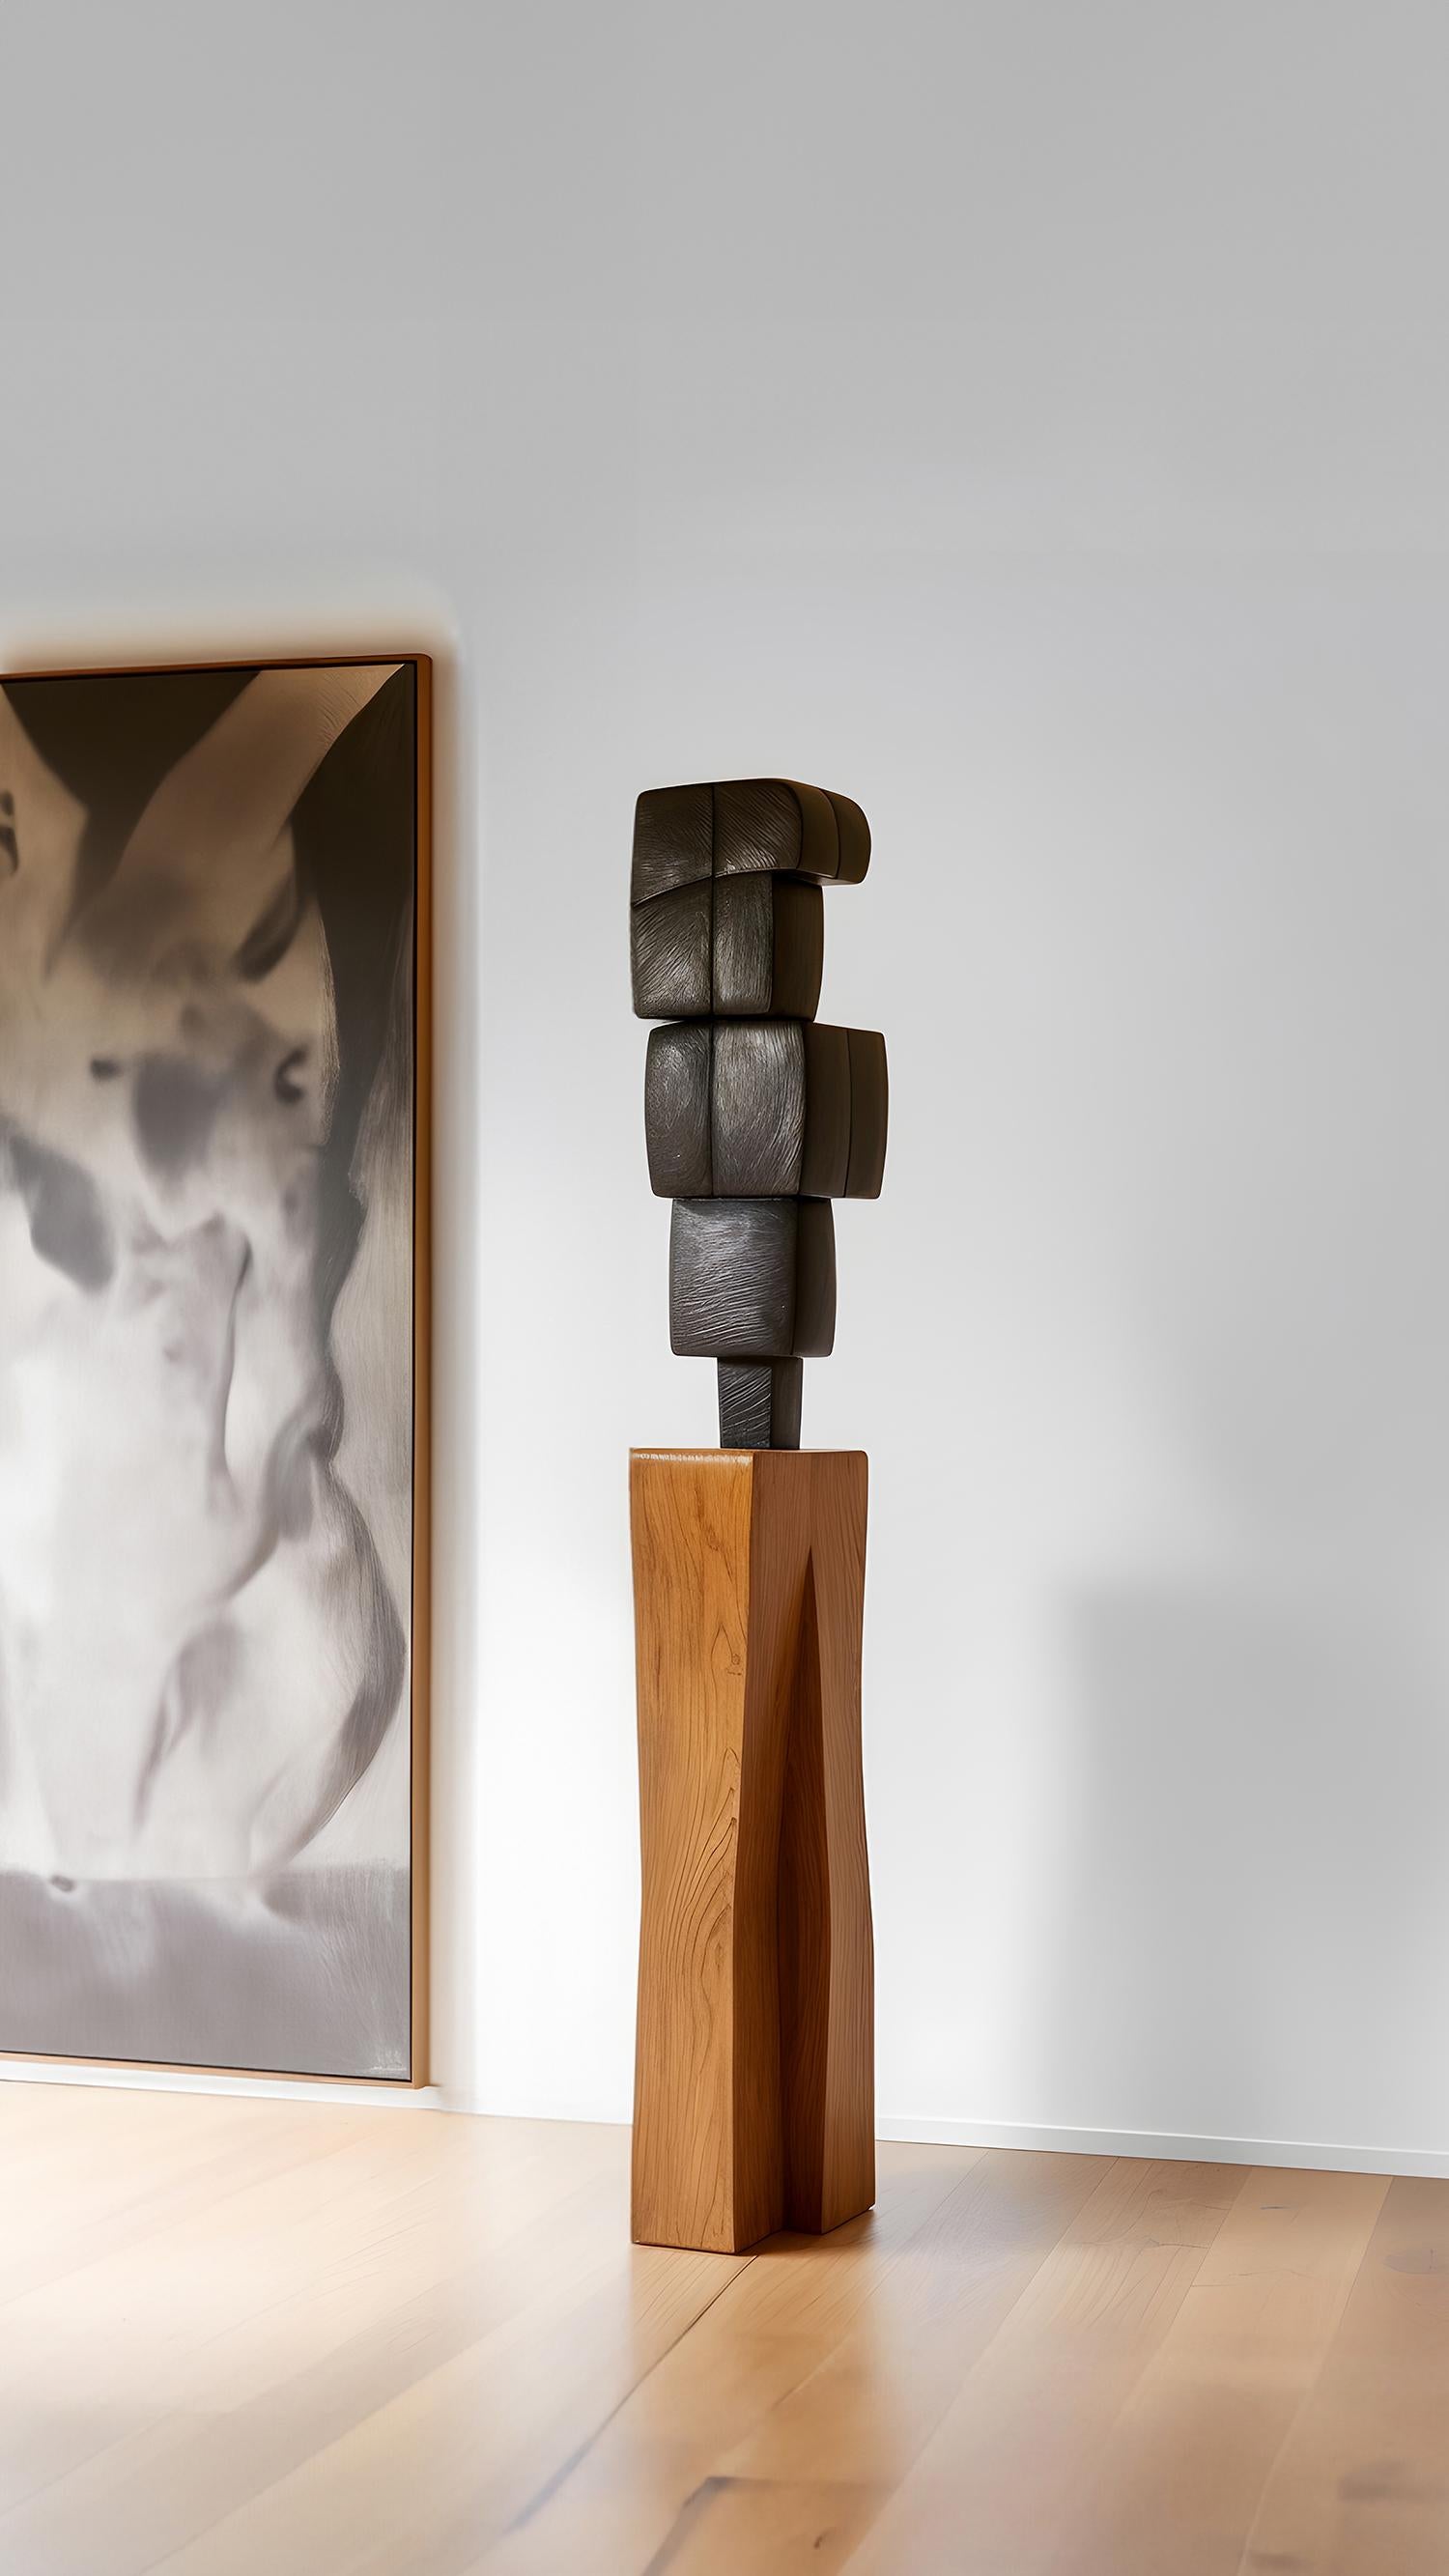 Mexican Monumental Wooden Sculpture Inspired in Constantin Brancusi, Unseen Force 25 For Sale